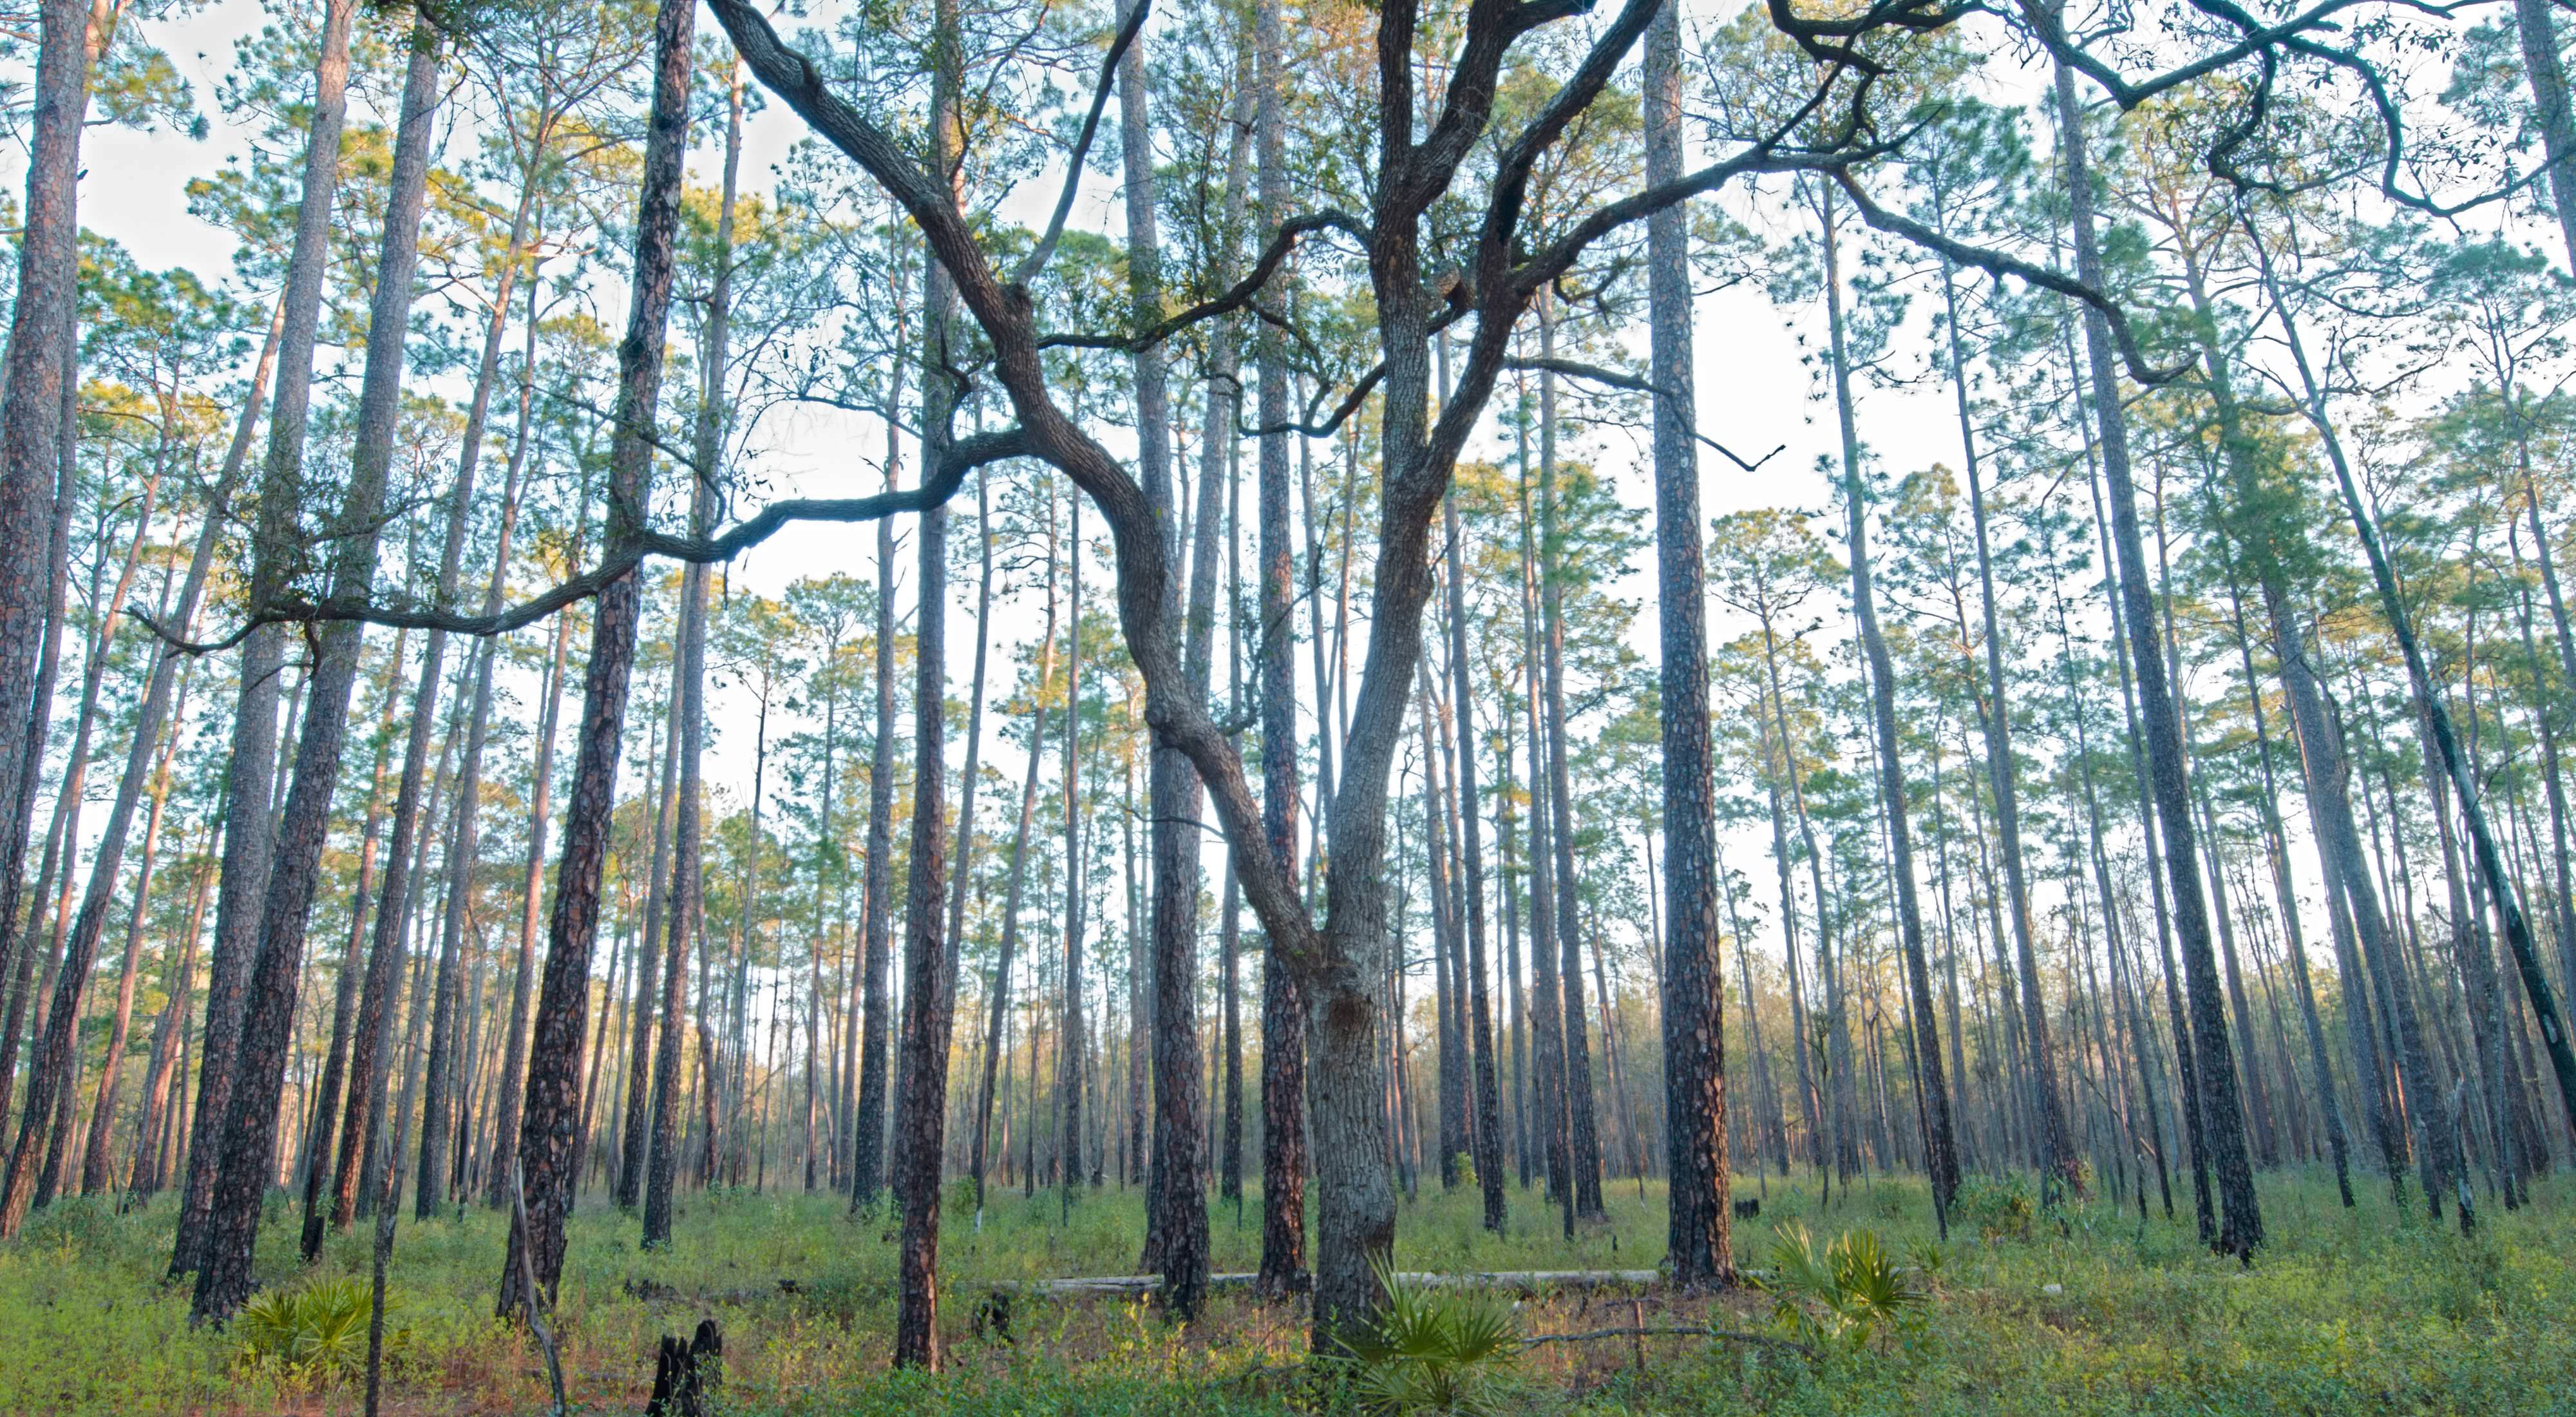 Tall pine trees of Moody Forest Preserve in Georgia.